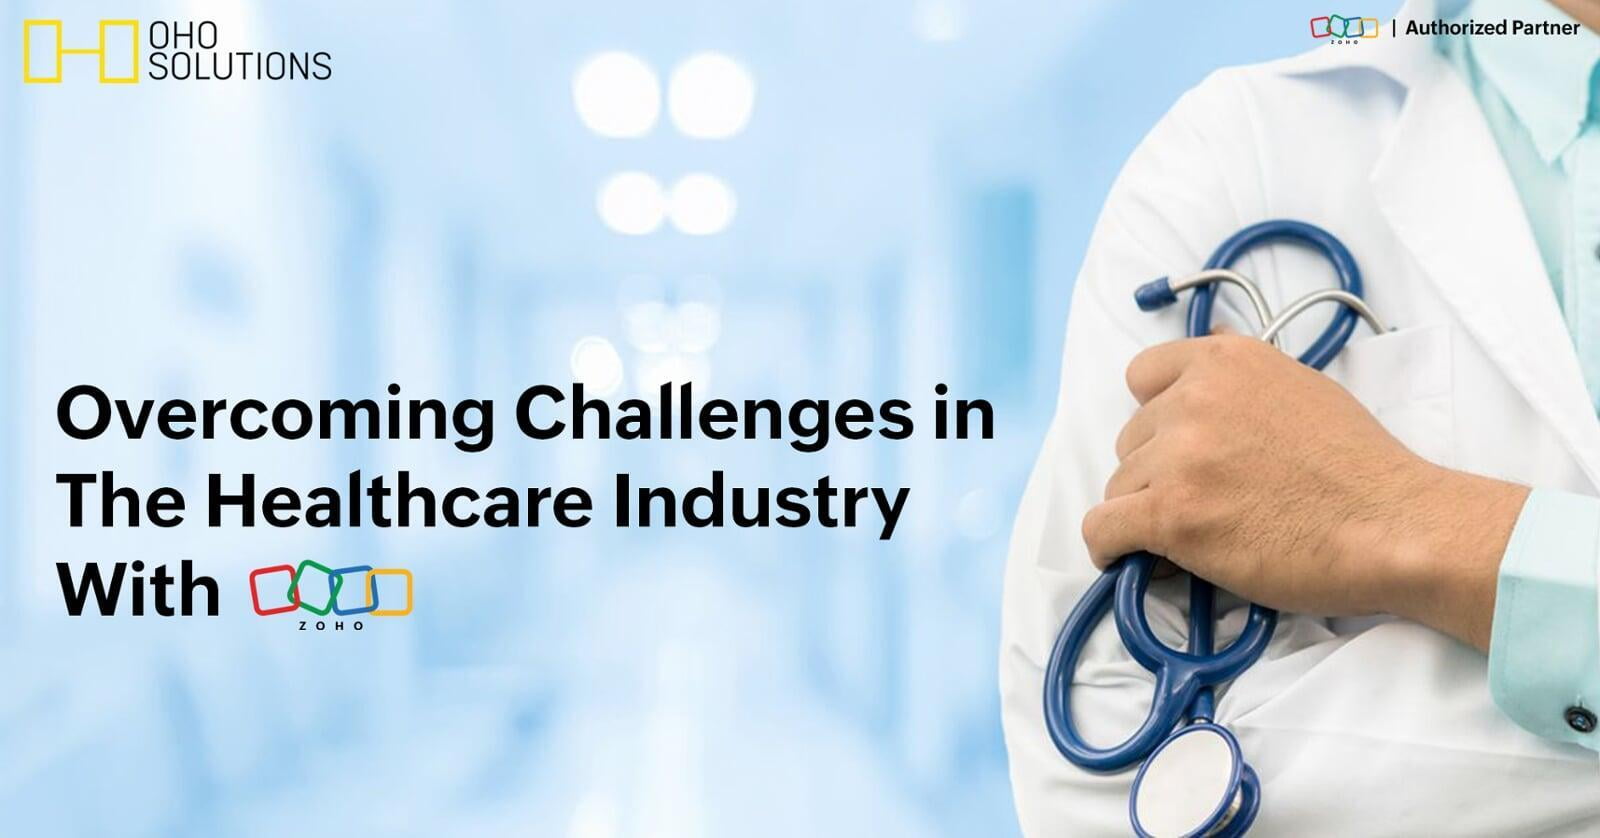 Oho Solutions Overcoming Challenges in The Healthcare Industry